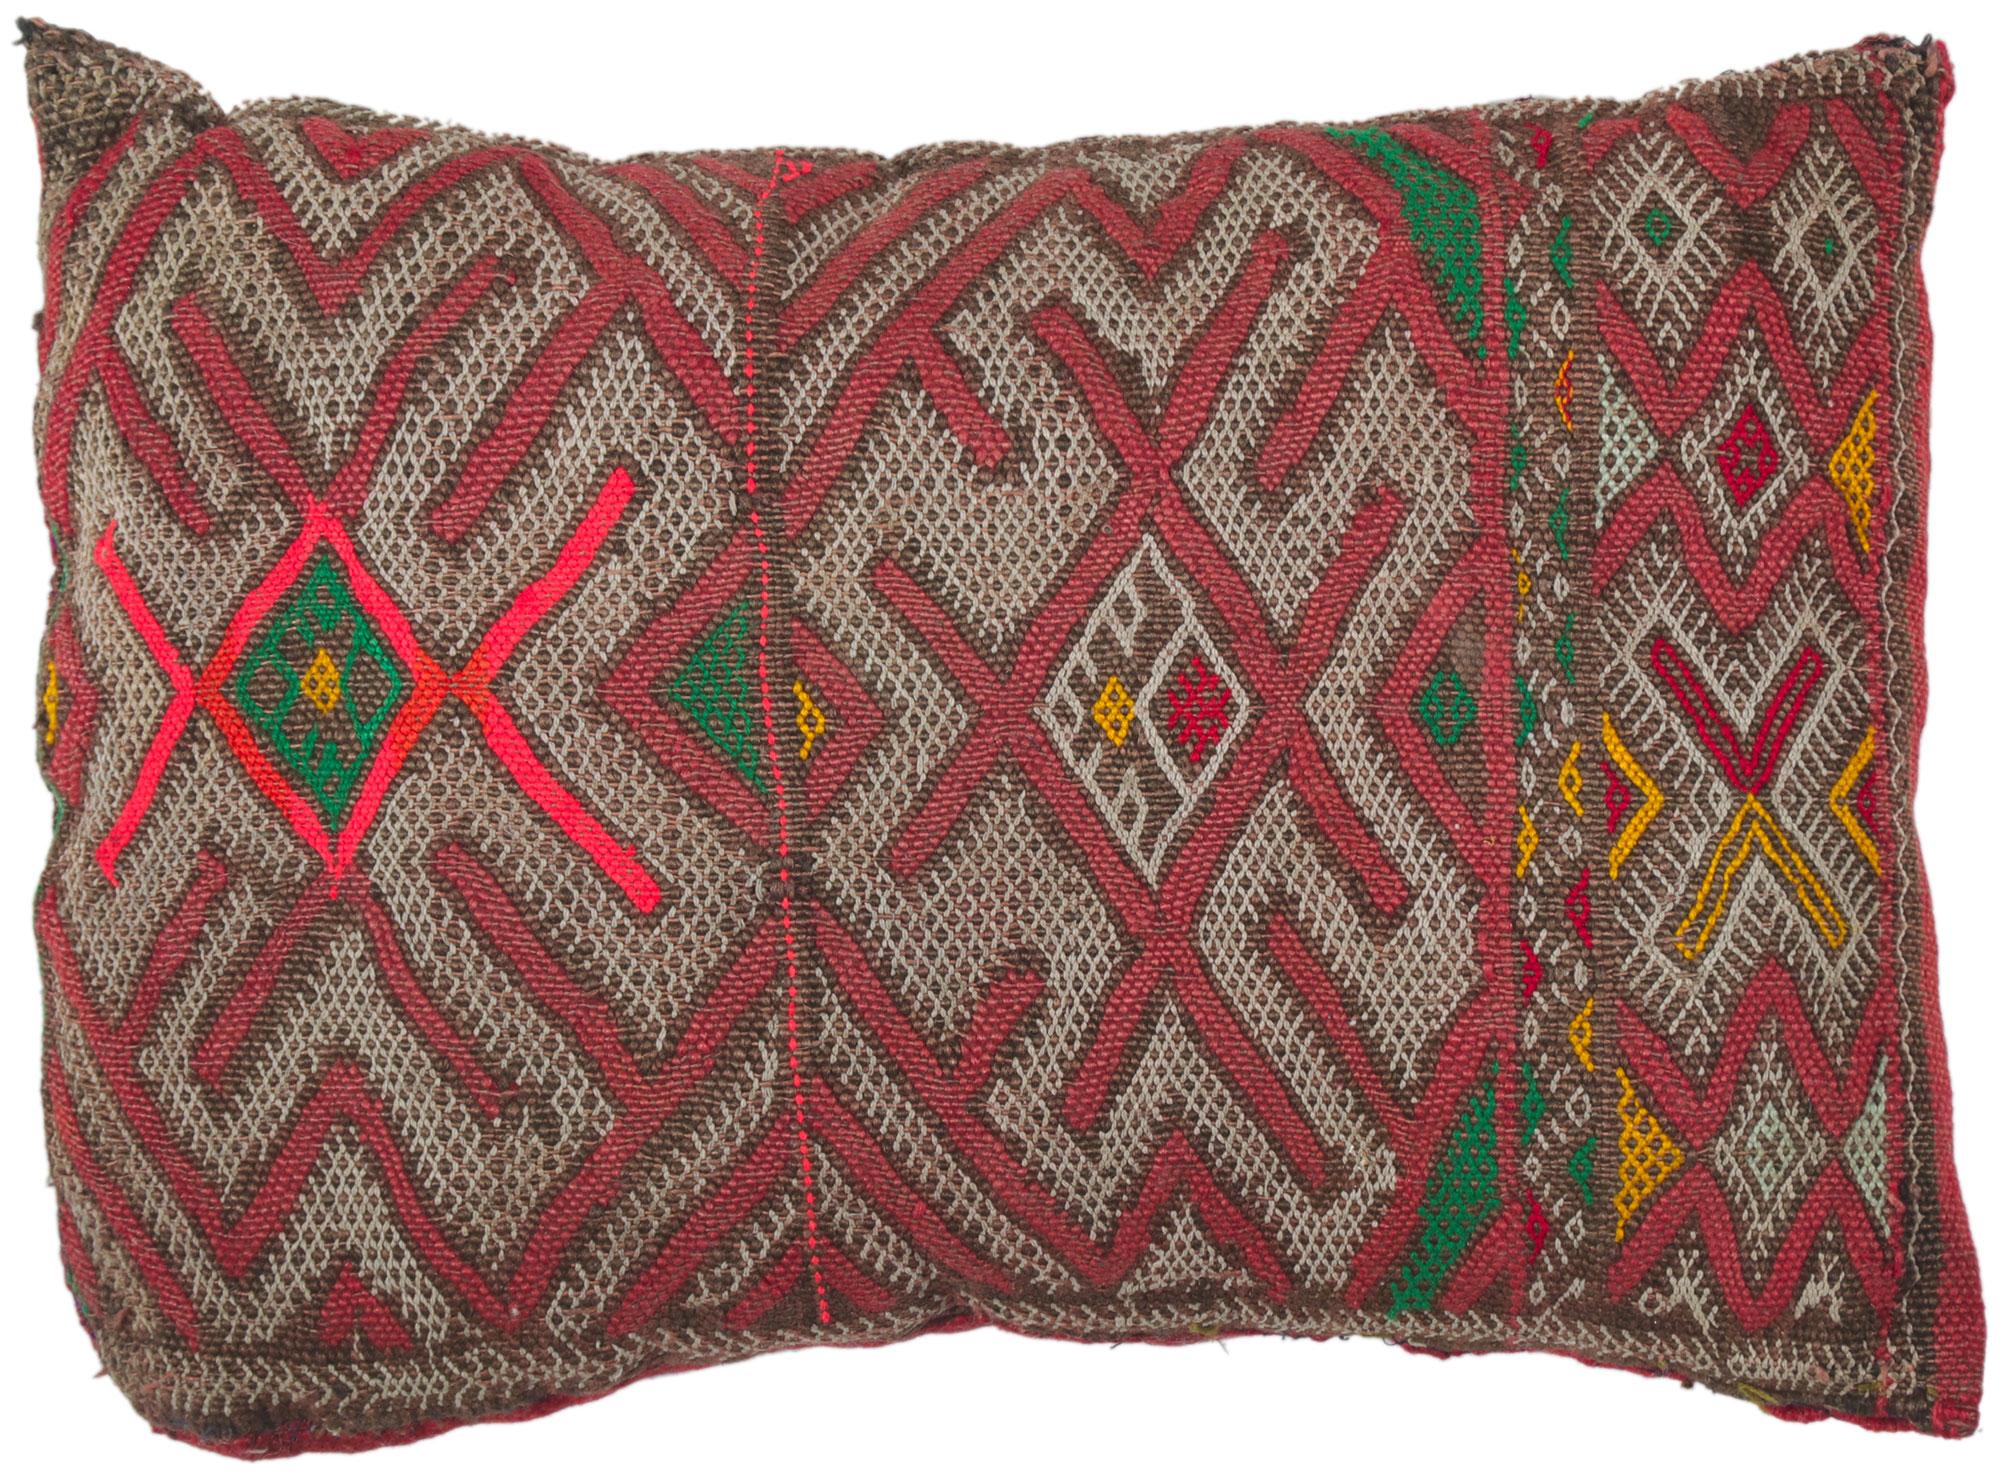 Vintage Zemmour Moroccan Rug Pillow by Berber Tribes of Morocco For Sale 2